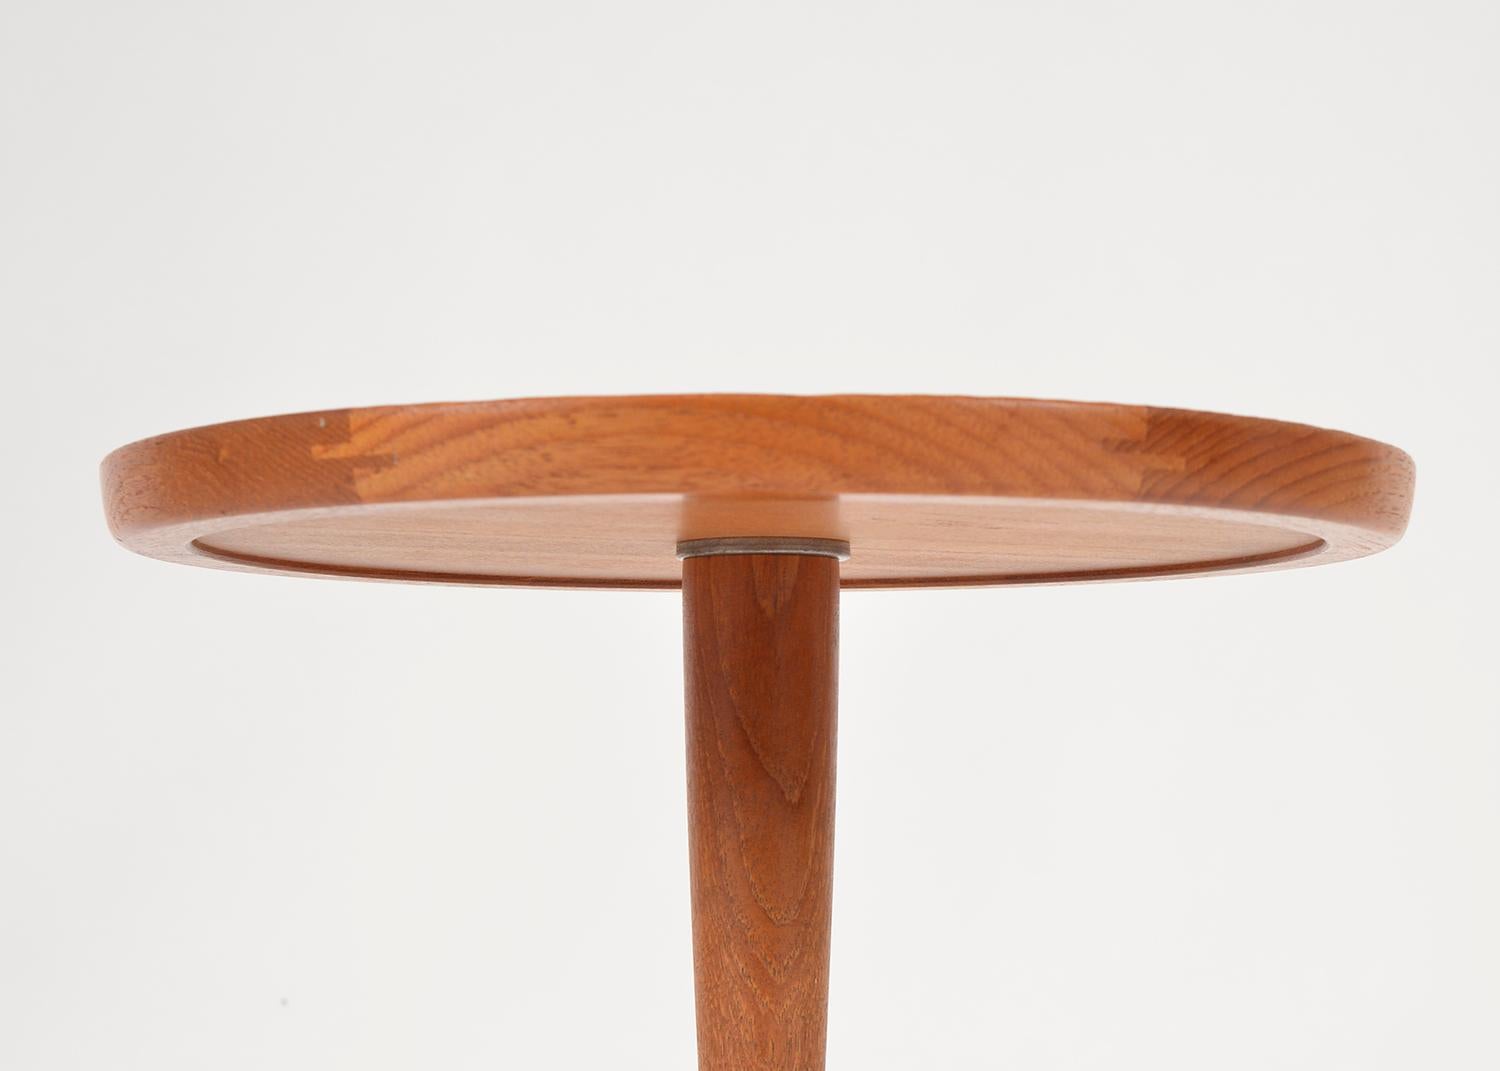 1960s Danish Modern Teak Occasional Side Wine Table by Hans C Andersen for Artex For Sale 6